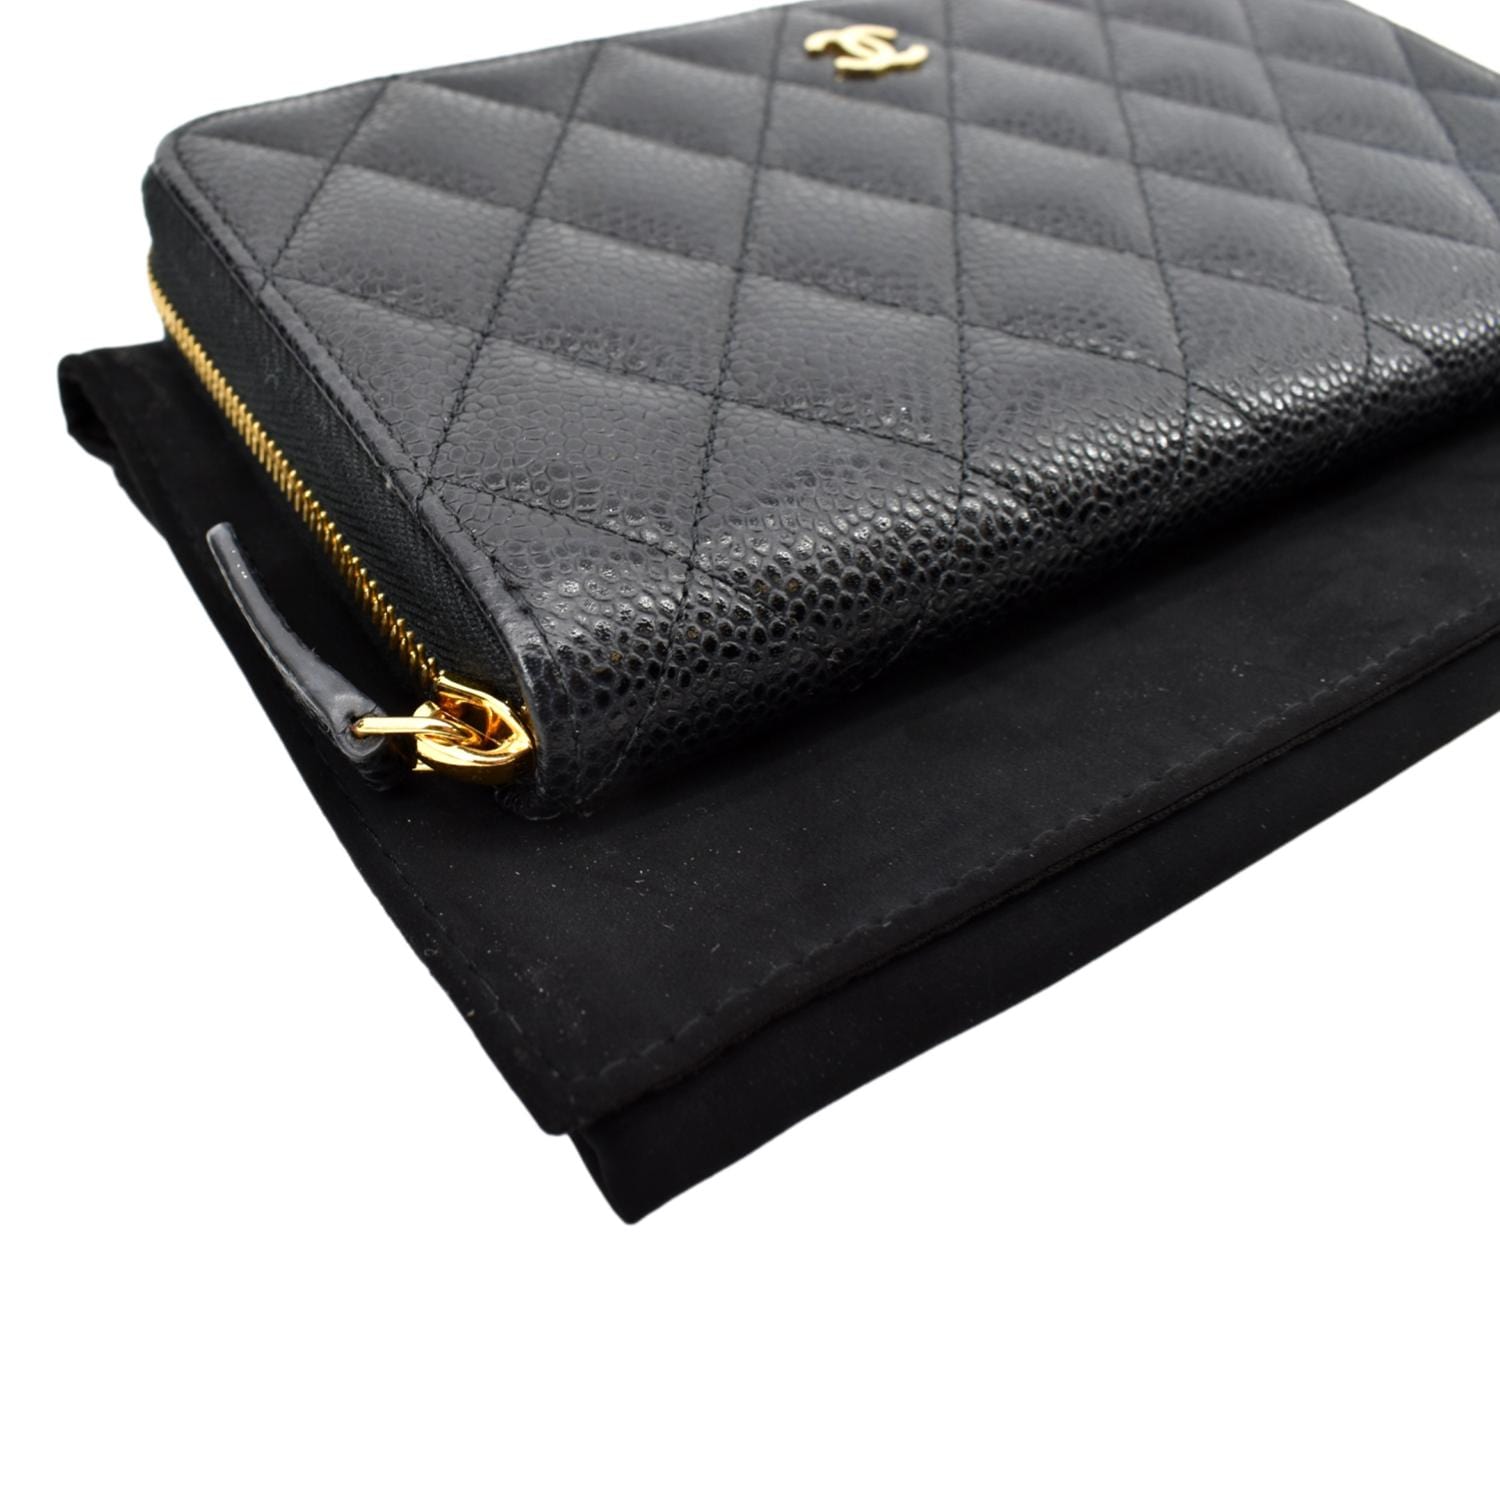 ViaAnabel - This chic and durable Chanel Black Caviar Leather